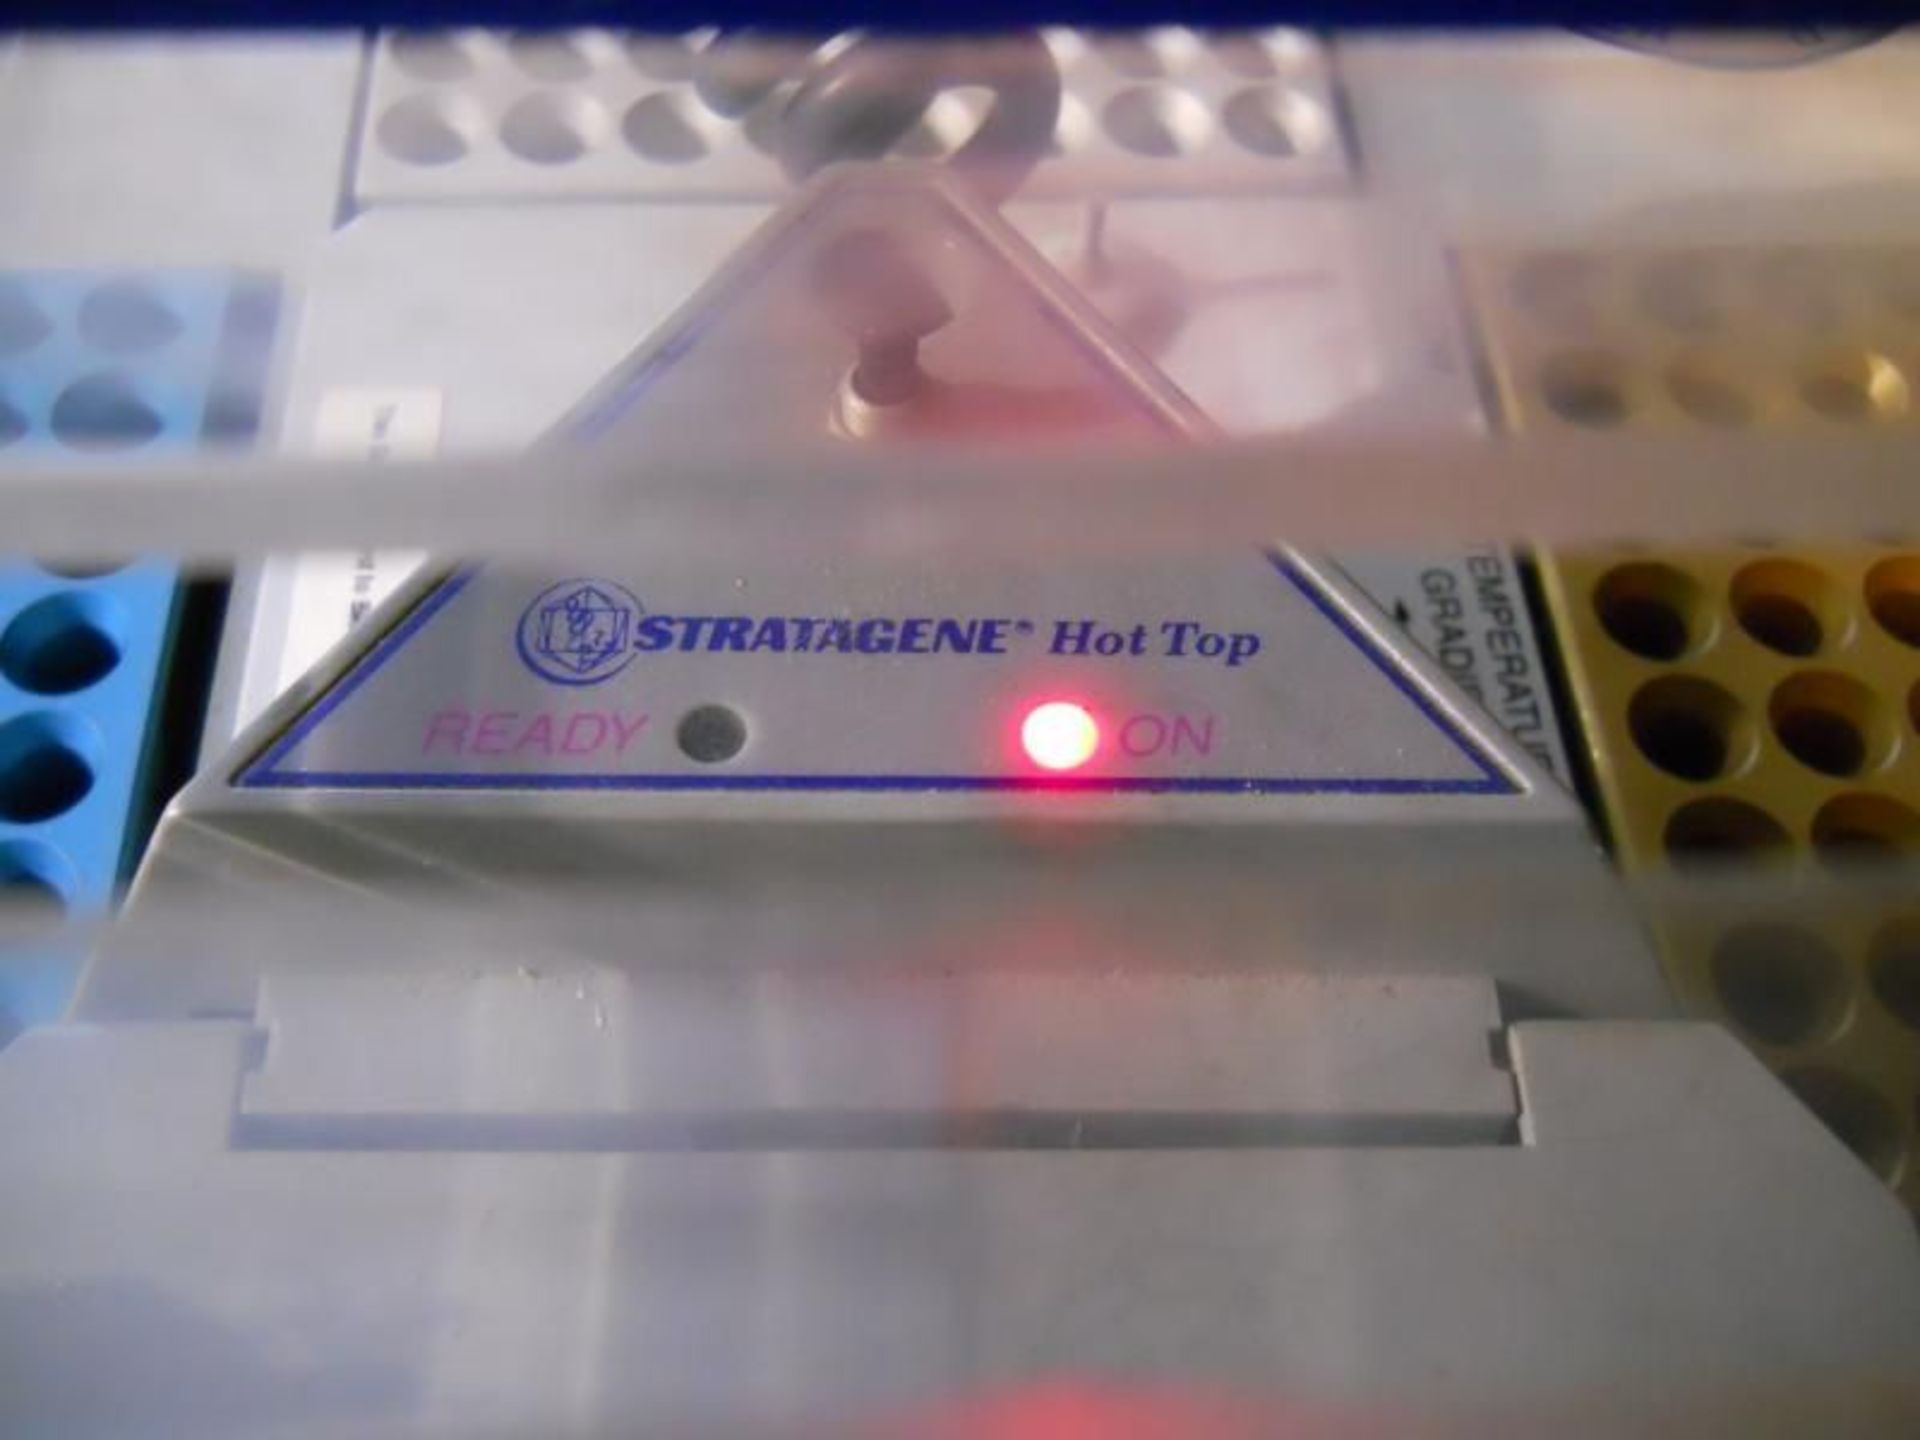 Stratagene Robocycler Gradient 40 Thermal Cycler PCR DNA With Hot Top #11, Qty 1, 221222495636 - Image 11 of 12